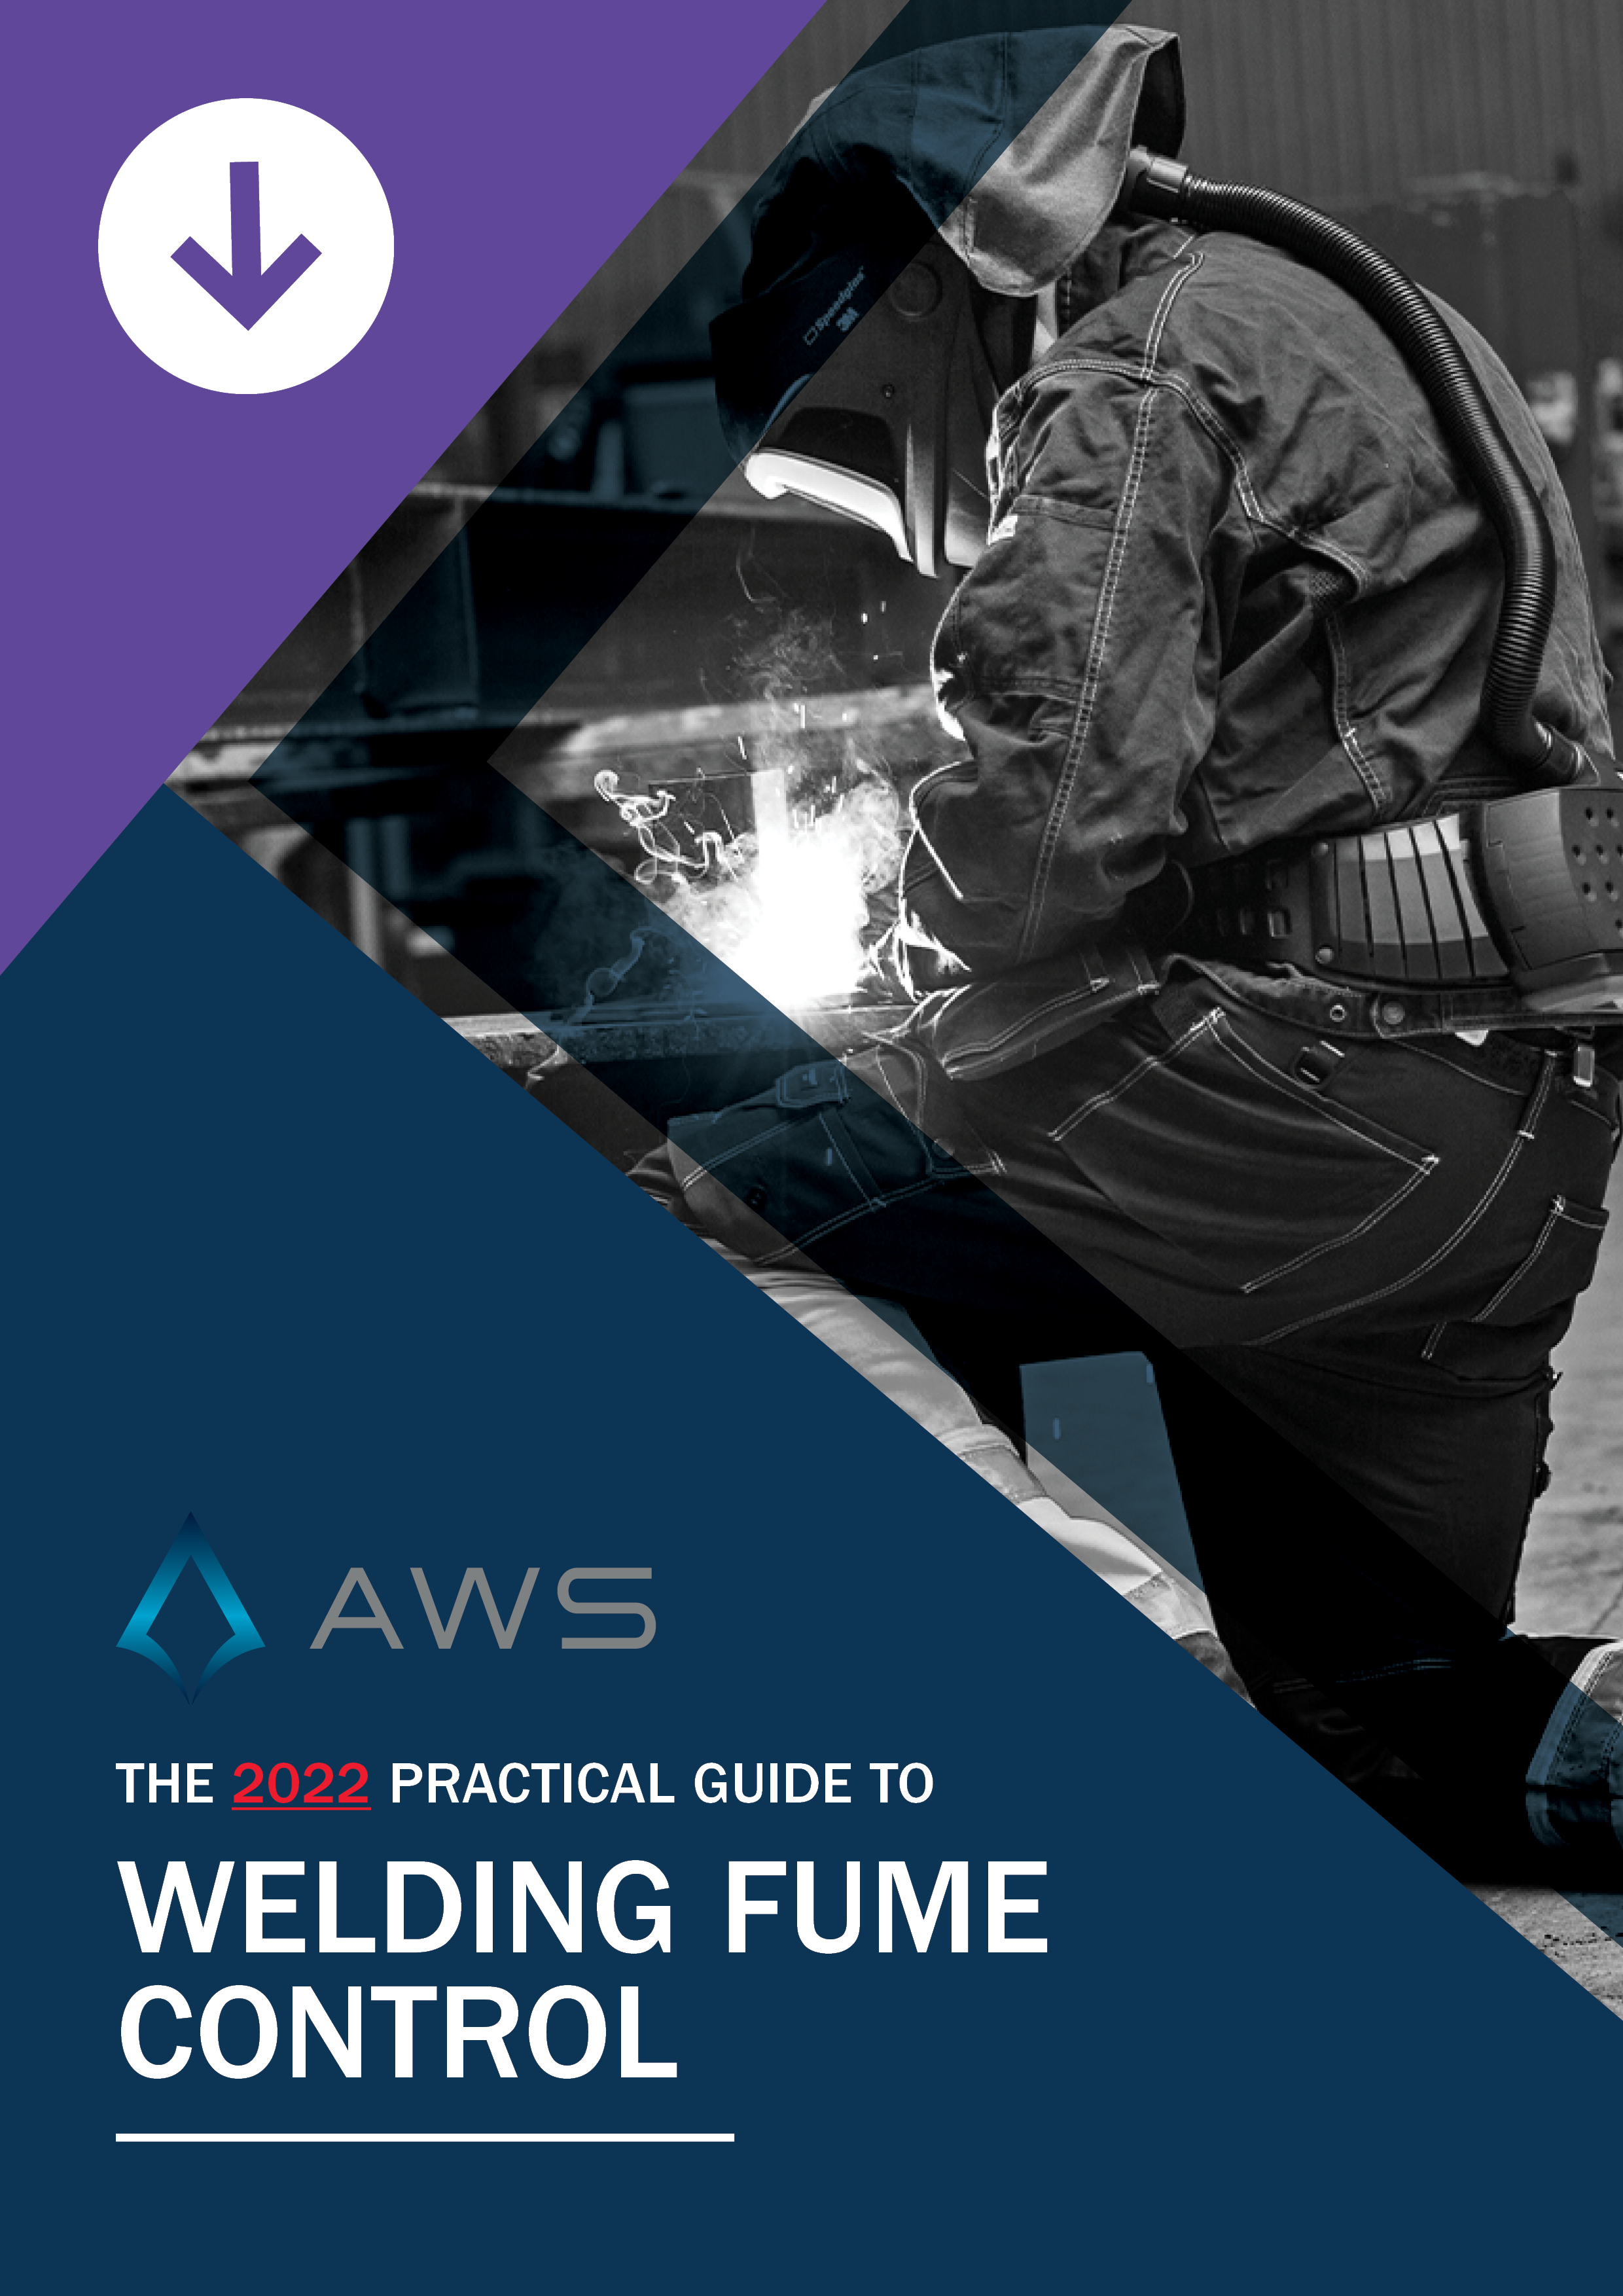 NEW: 2022 Practical Guide to Welding Fume